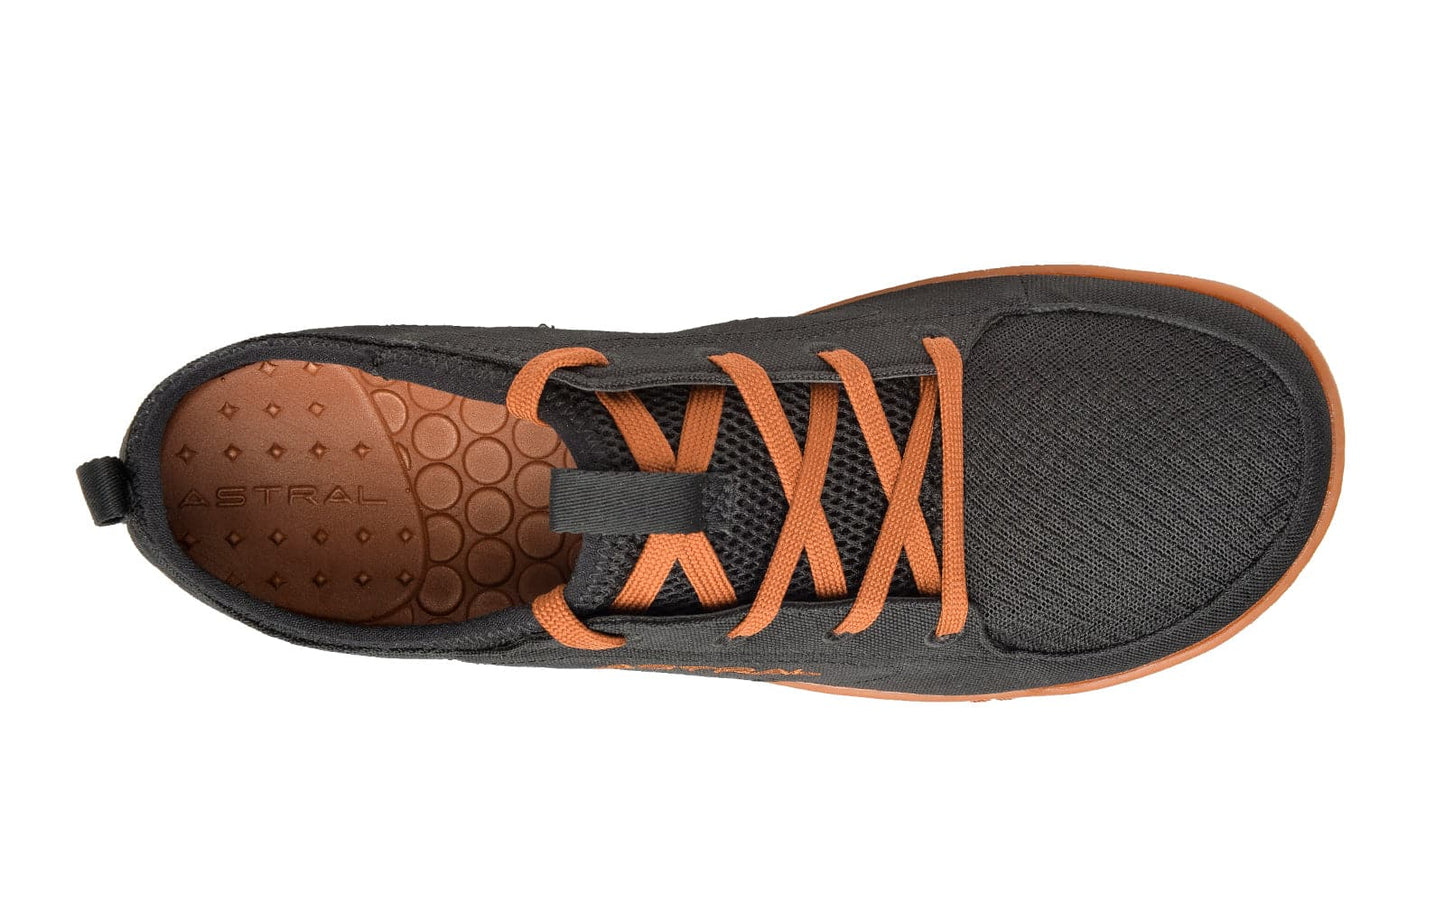 Featuring the Loyak - Men's men's footwear manufactured by Astral shown here from a third angle.